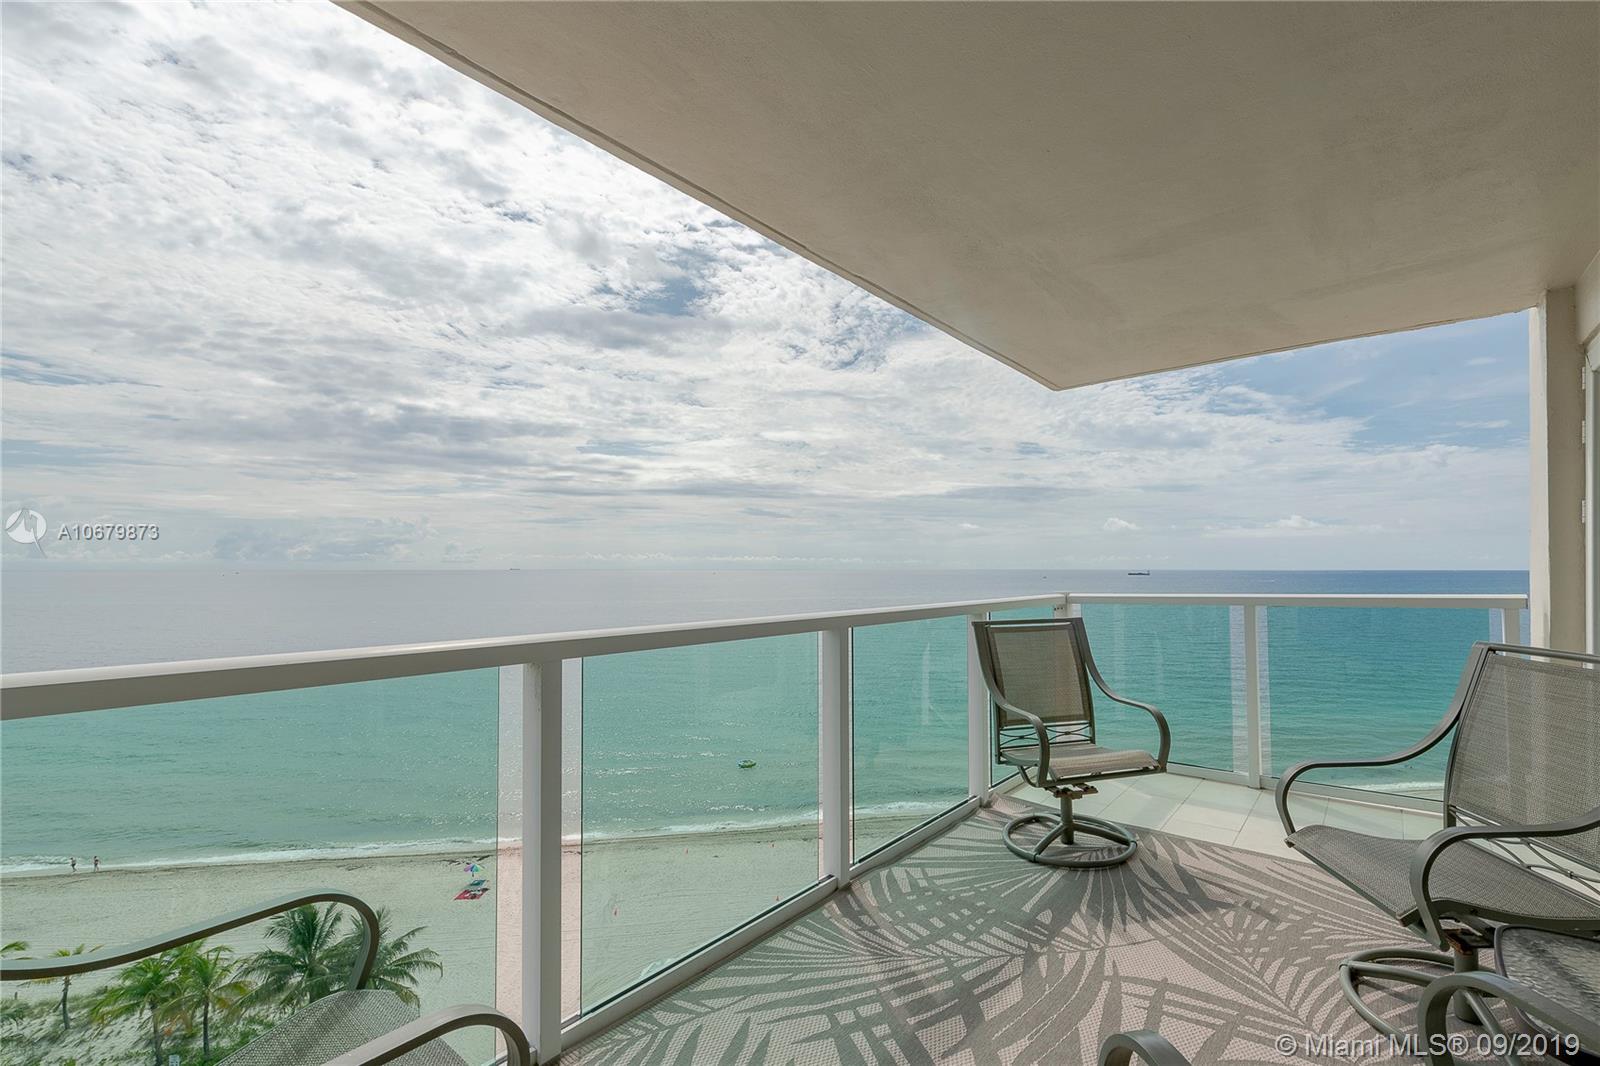 Balcony with North, South and East oceanfront views. The Relaxing Florida lifestyle